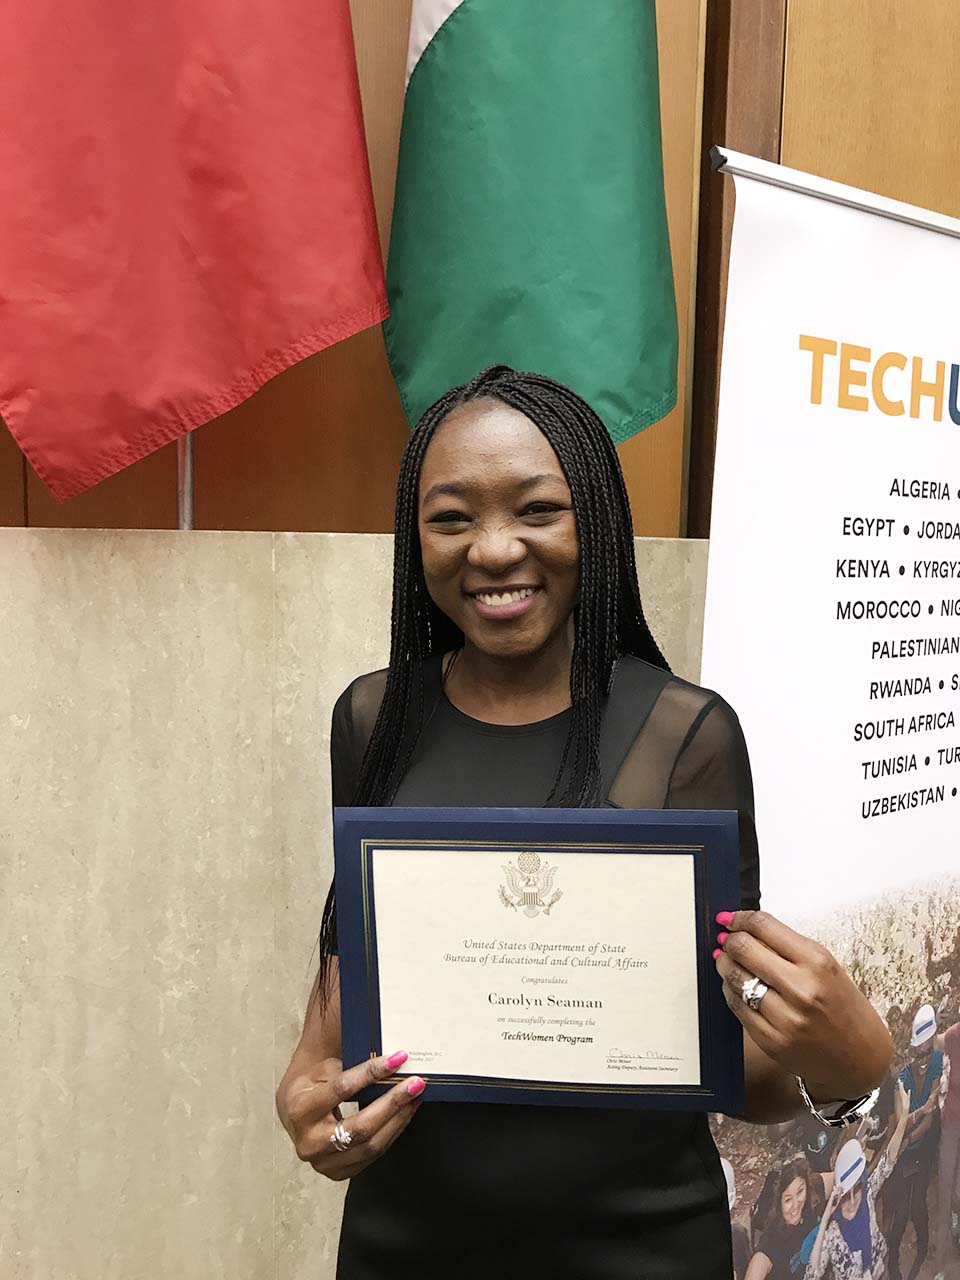 Celebrating with my TechWomen 2017 Certificate at the US Dept. of State, Washington DC.